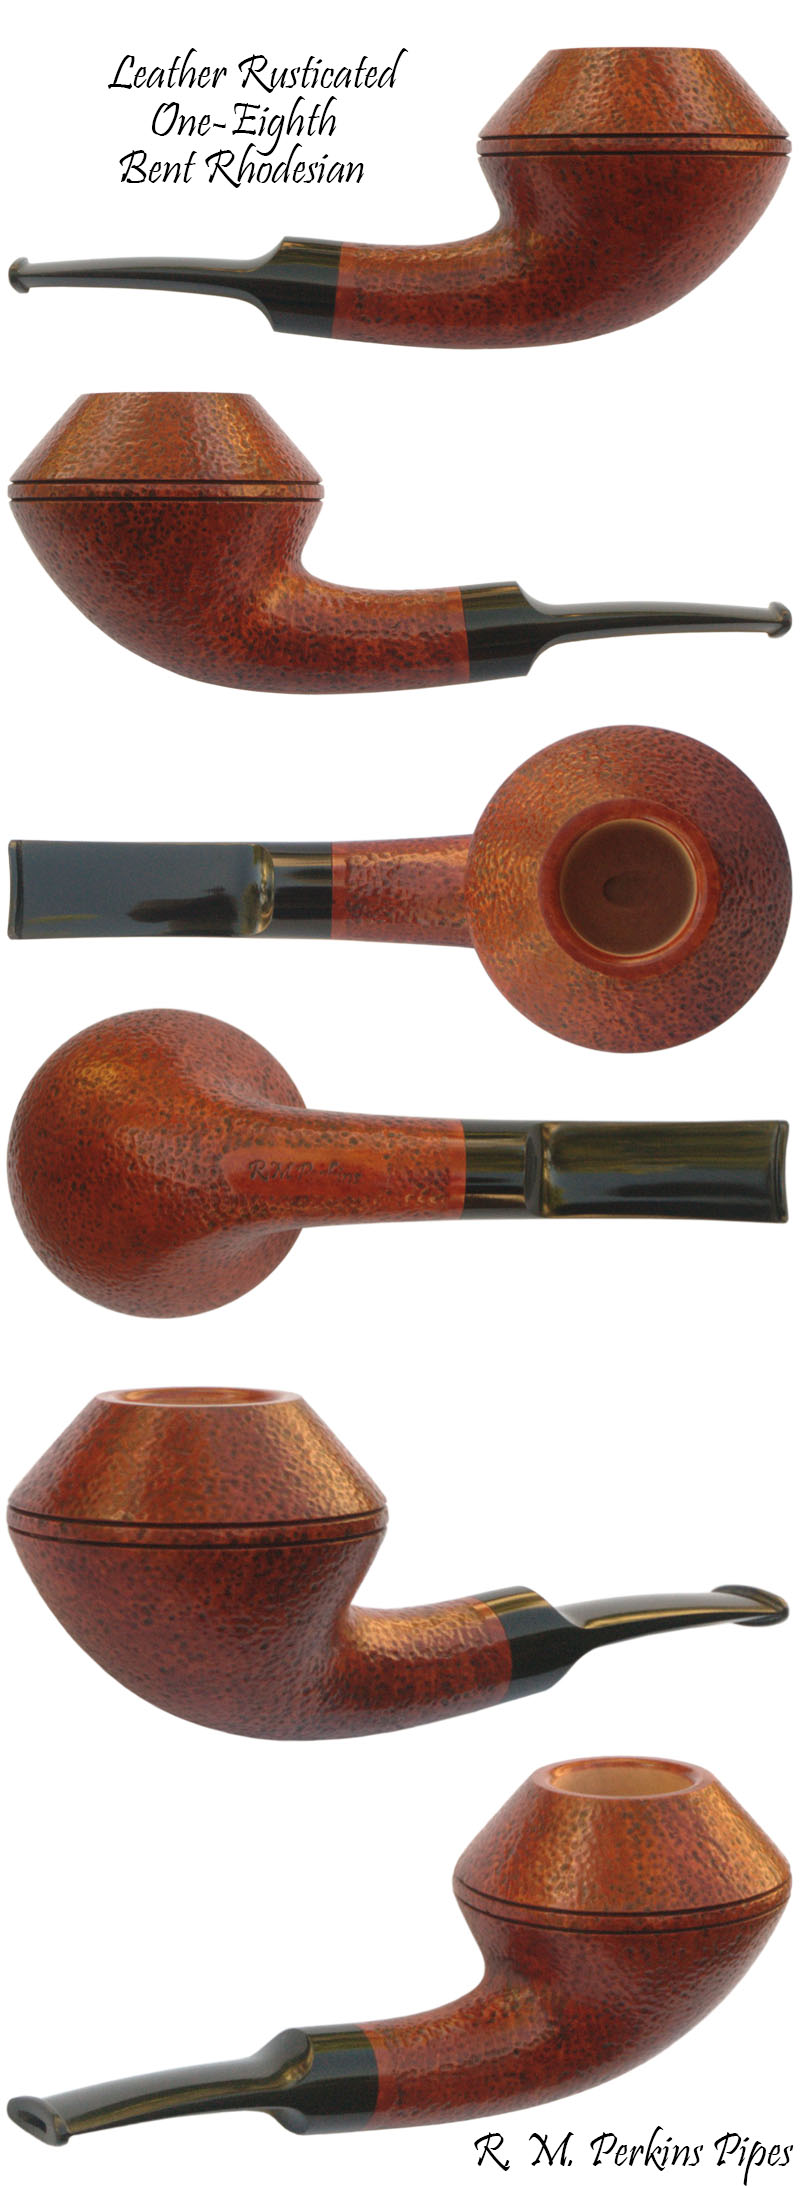 Leather Rusticated 1/8 Bent Rhodesian Smoking Pipe